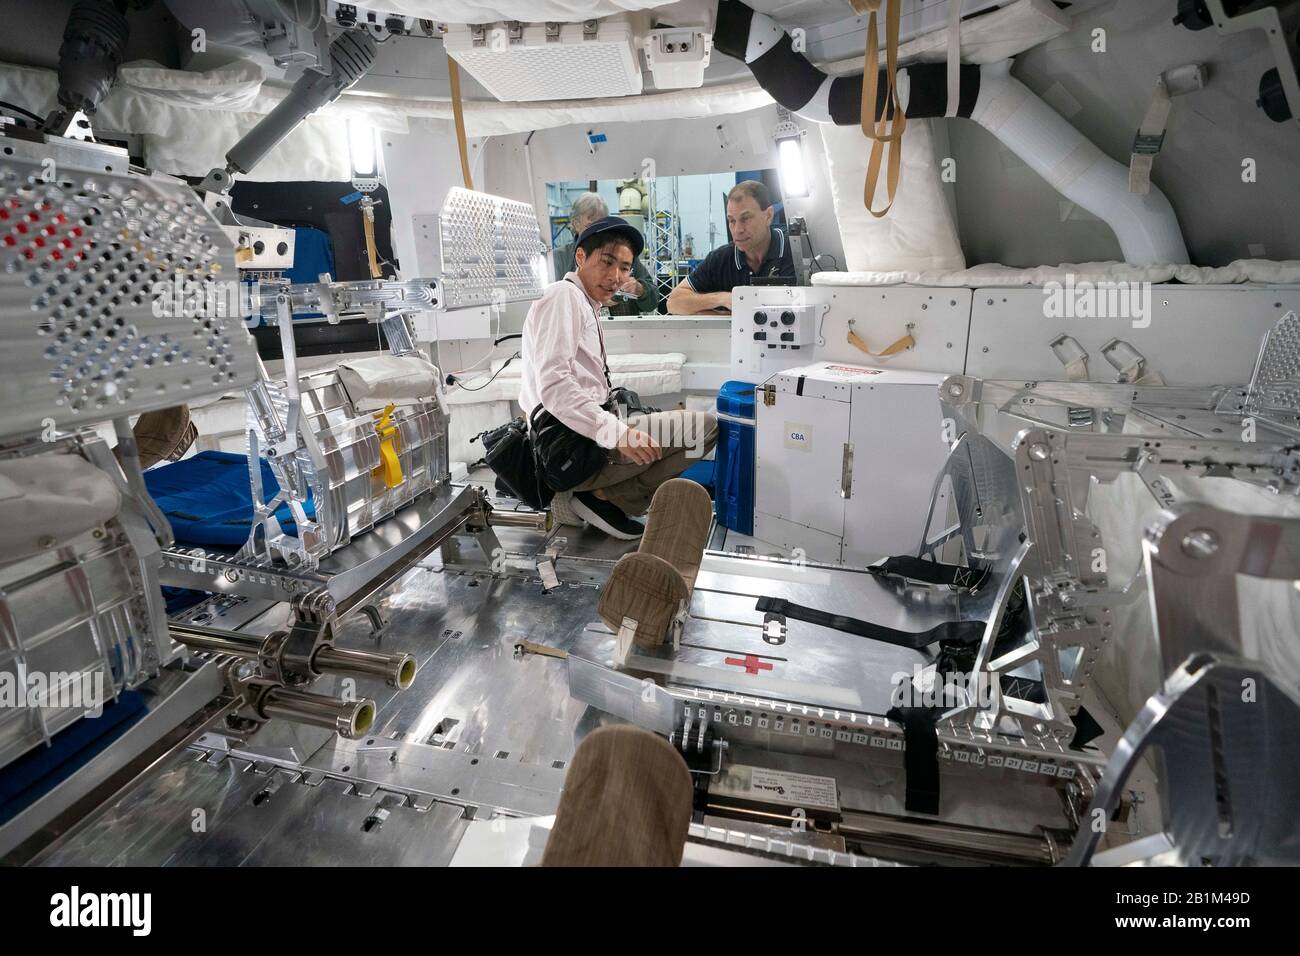 Journalists explore a mock-up of the Orion space capsule at NASA in Houston that will carry four astronauts in future deep space missions to the moon, an asteroid or Mars. Stock Photo